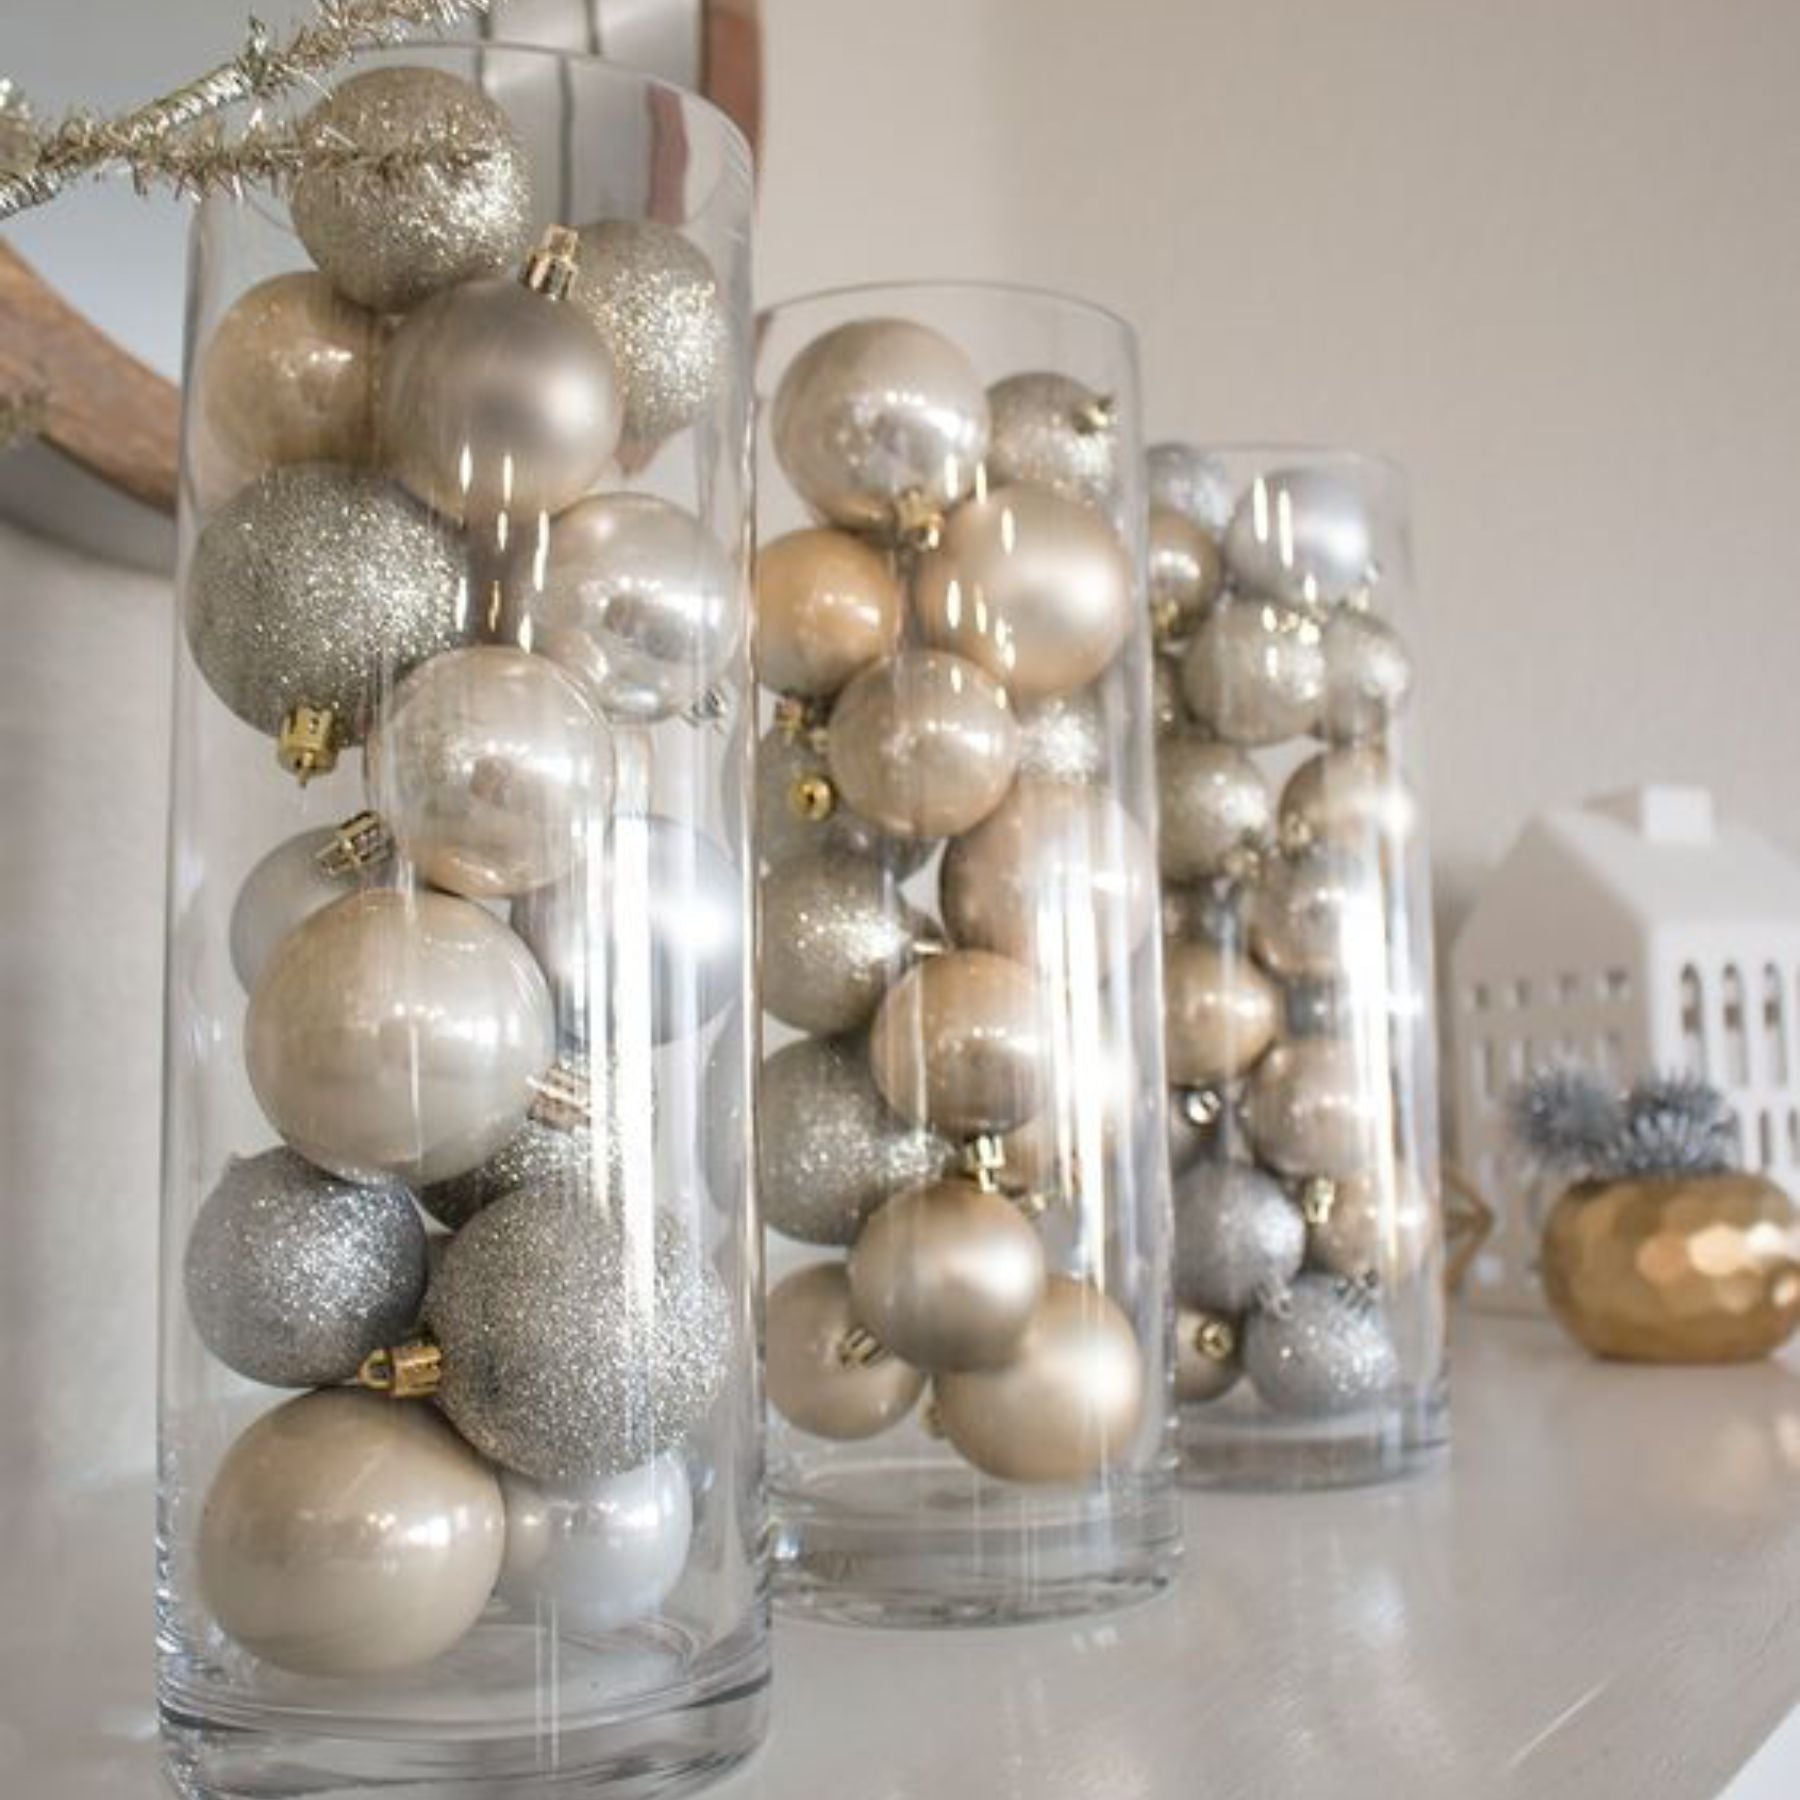 enhance your holiday decor with a touch of shimmer to create magic